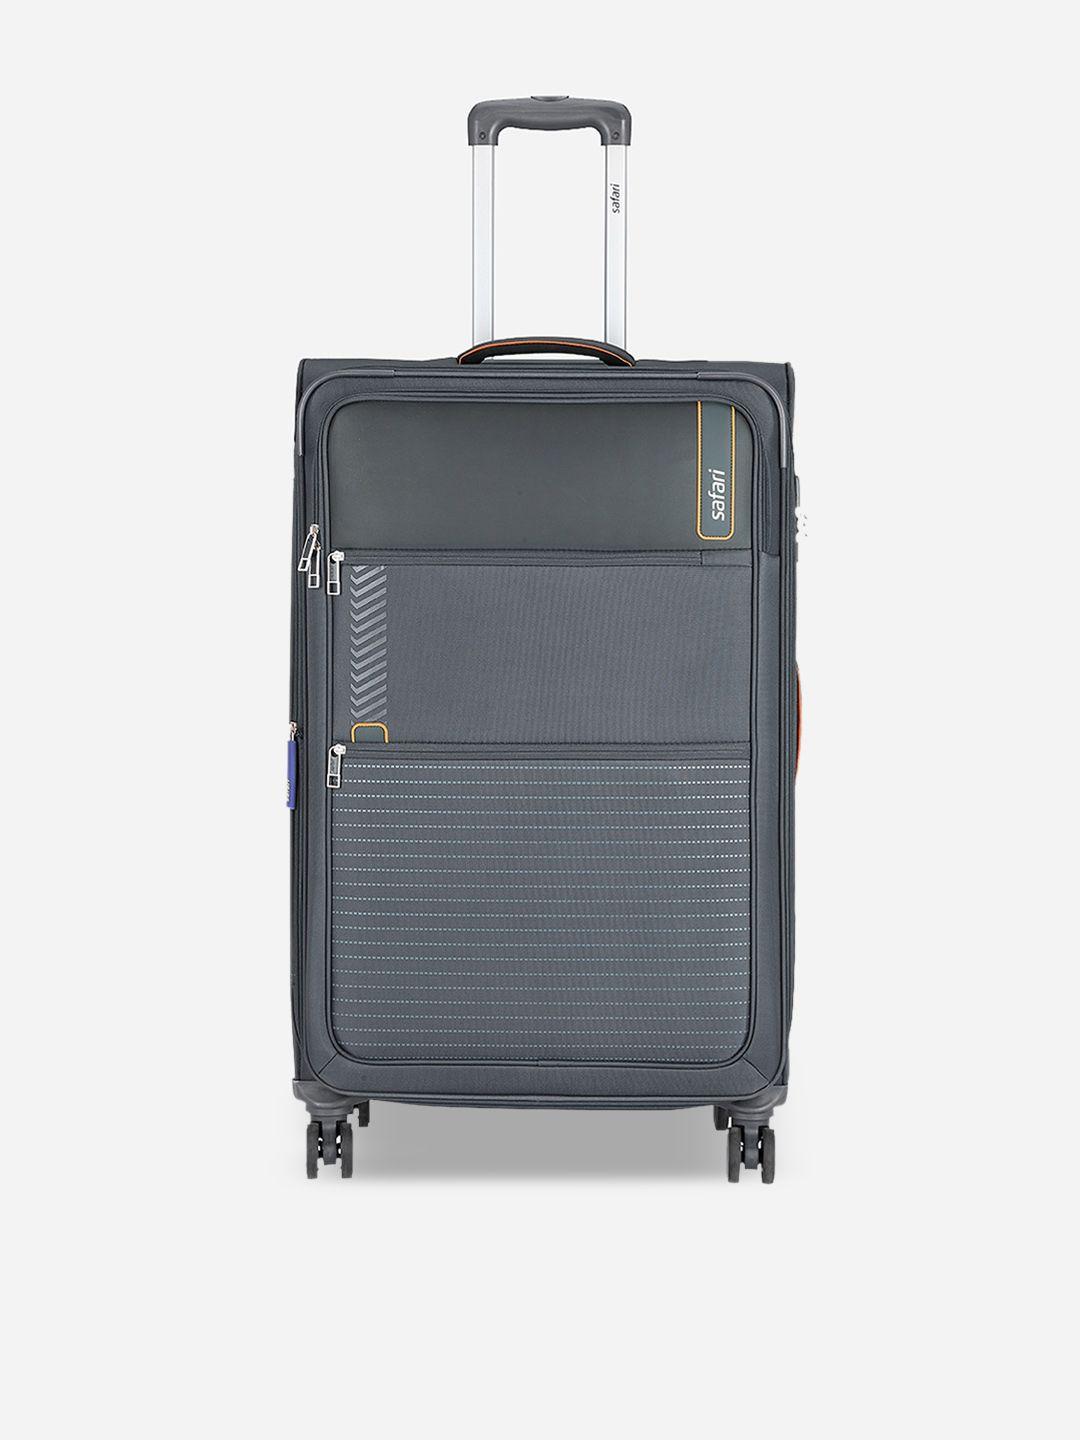 safari printed soft-sided cabin trolley suitcase